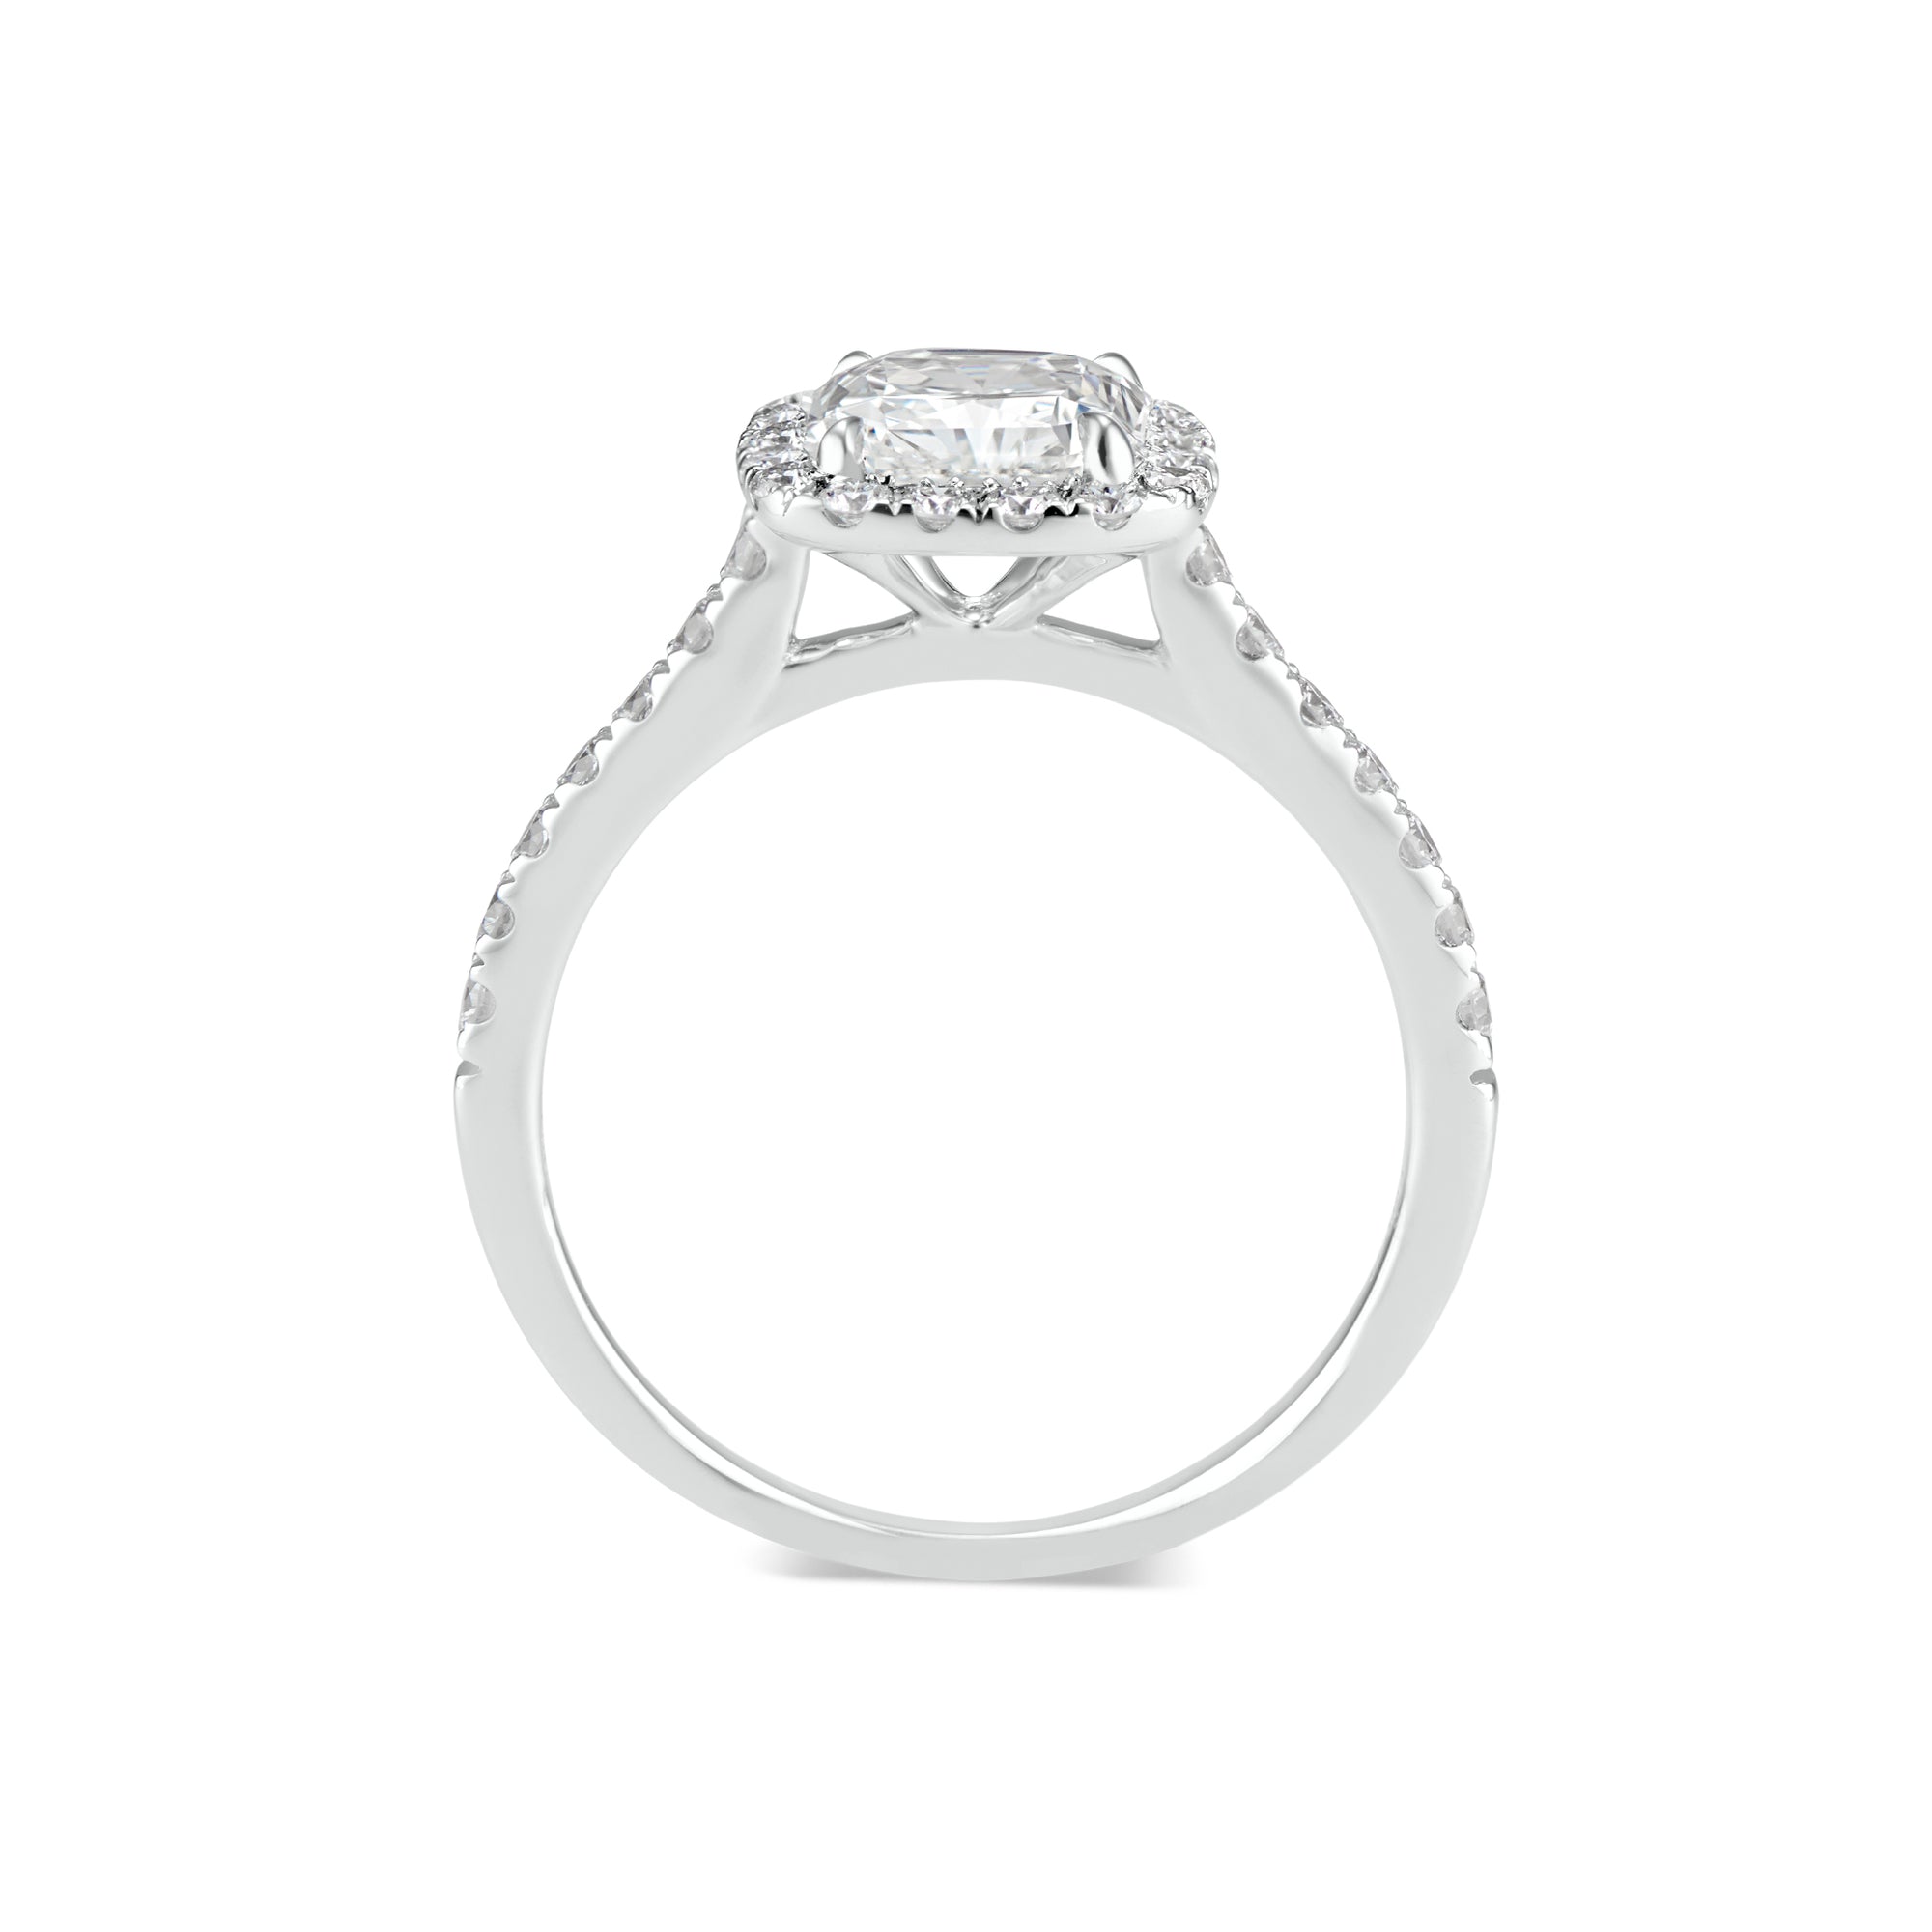 Elongated Radiant-Cut Halo Diamond Engagement Ring -18K white gold weighting 3.04 GR - 32 round diamonds totaling 0.47 carats GIA graded F - G color, VS2 - SI1 clarity